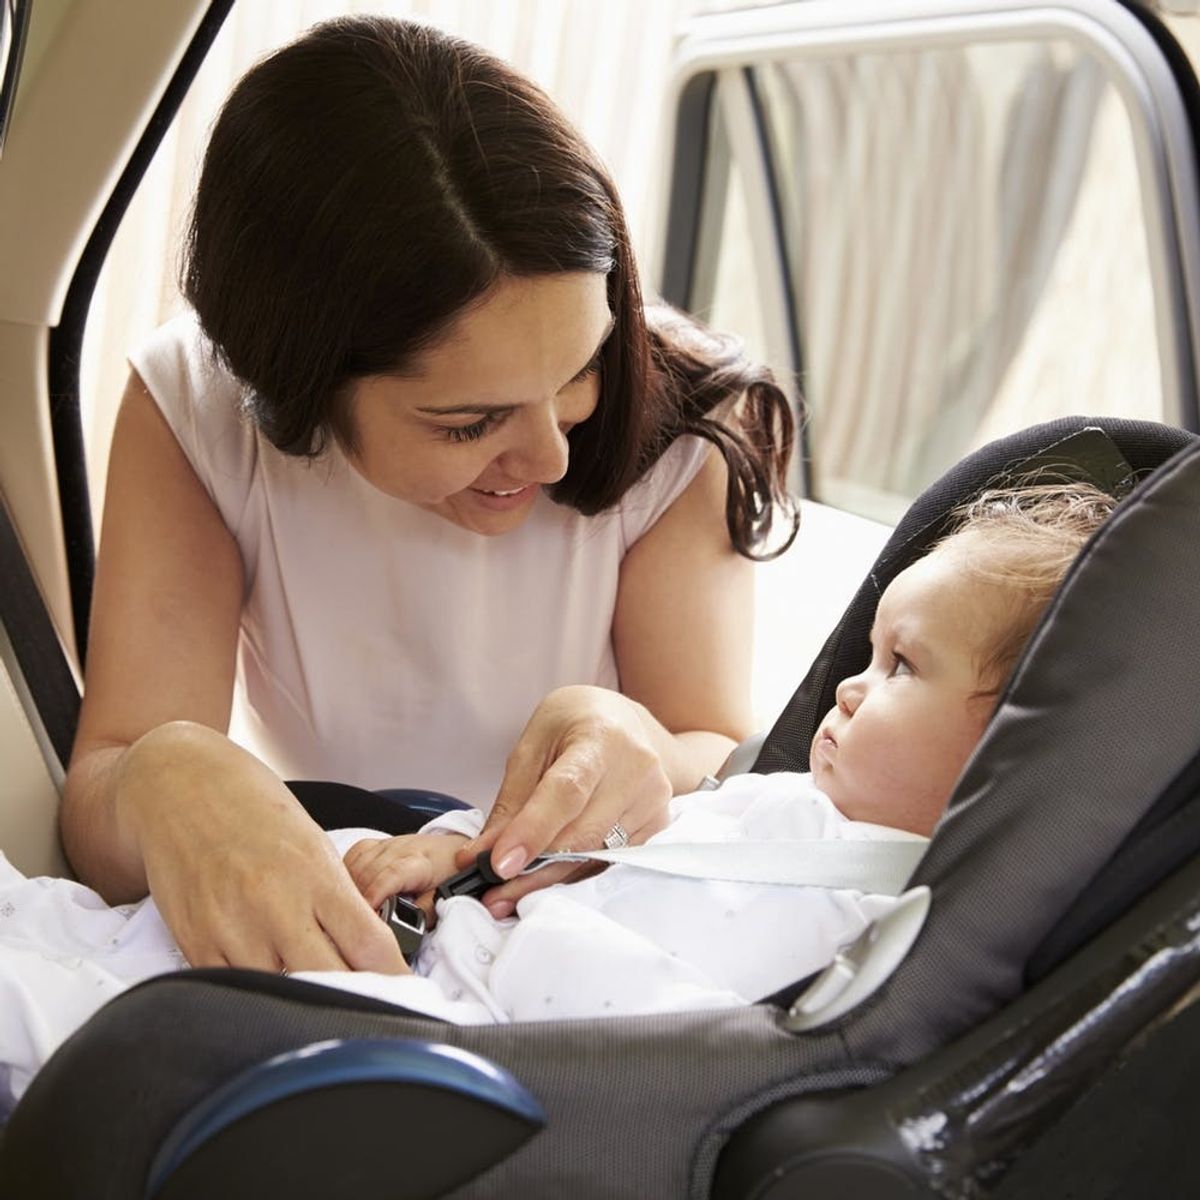 4 Expert-Approved Tips to Help Make Traveling With a Newborn a Breeze